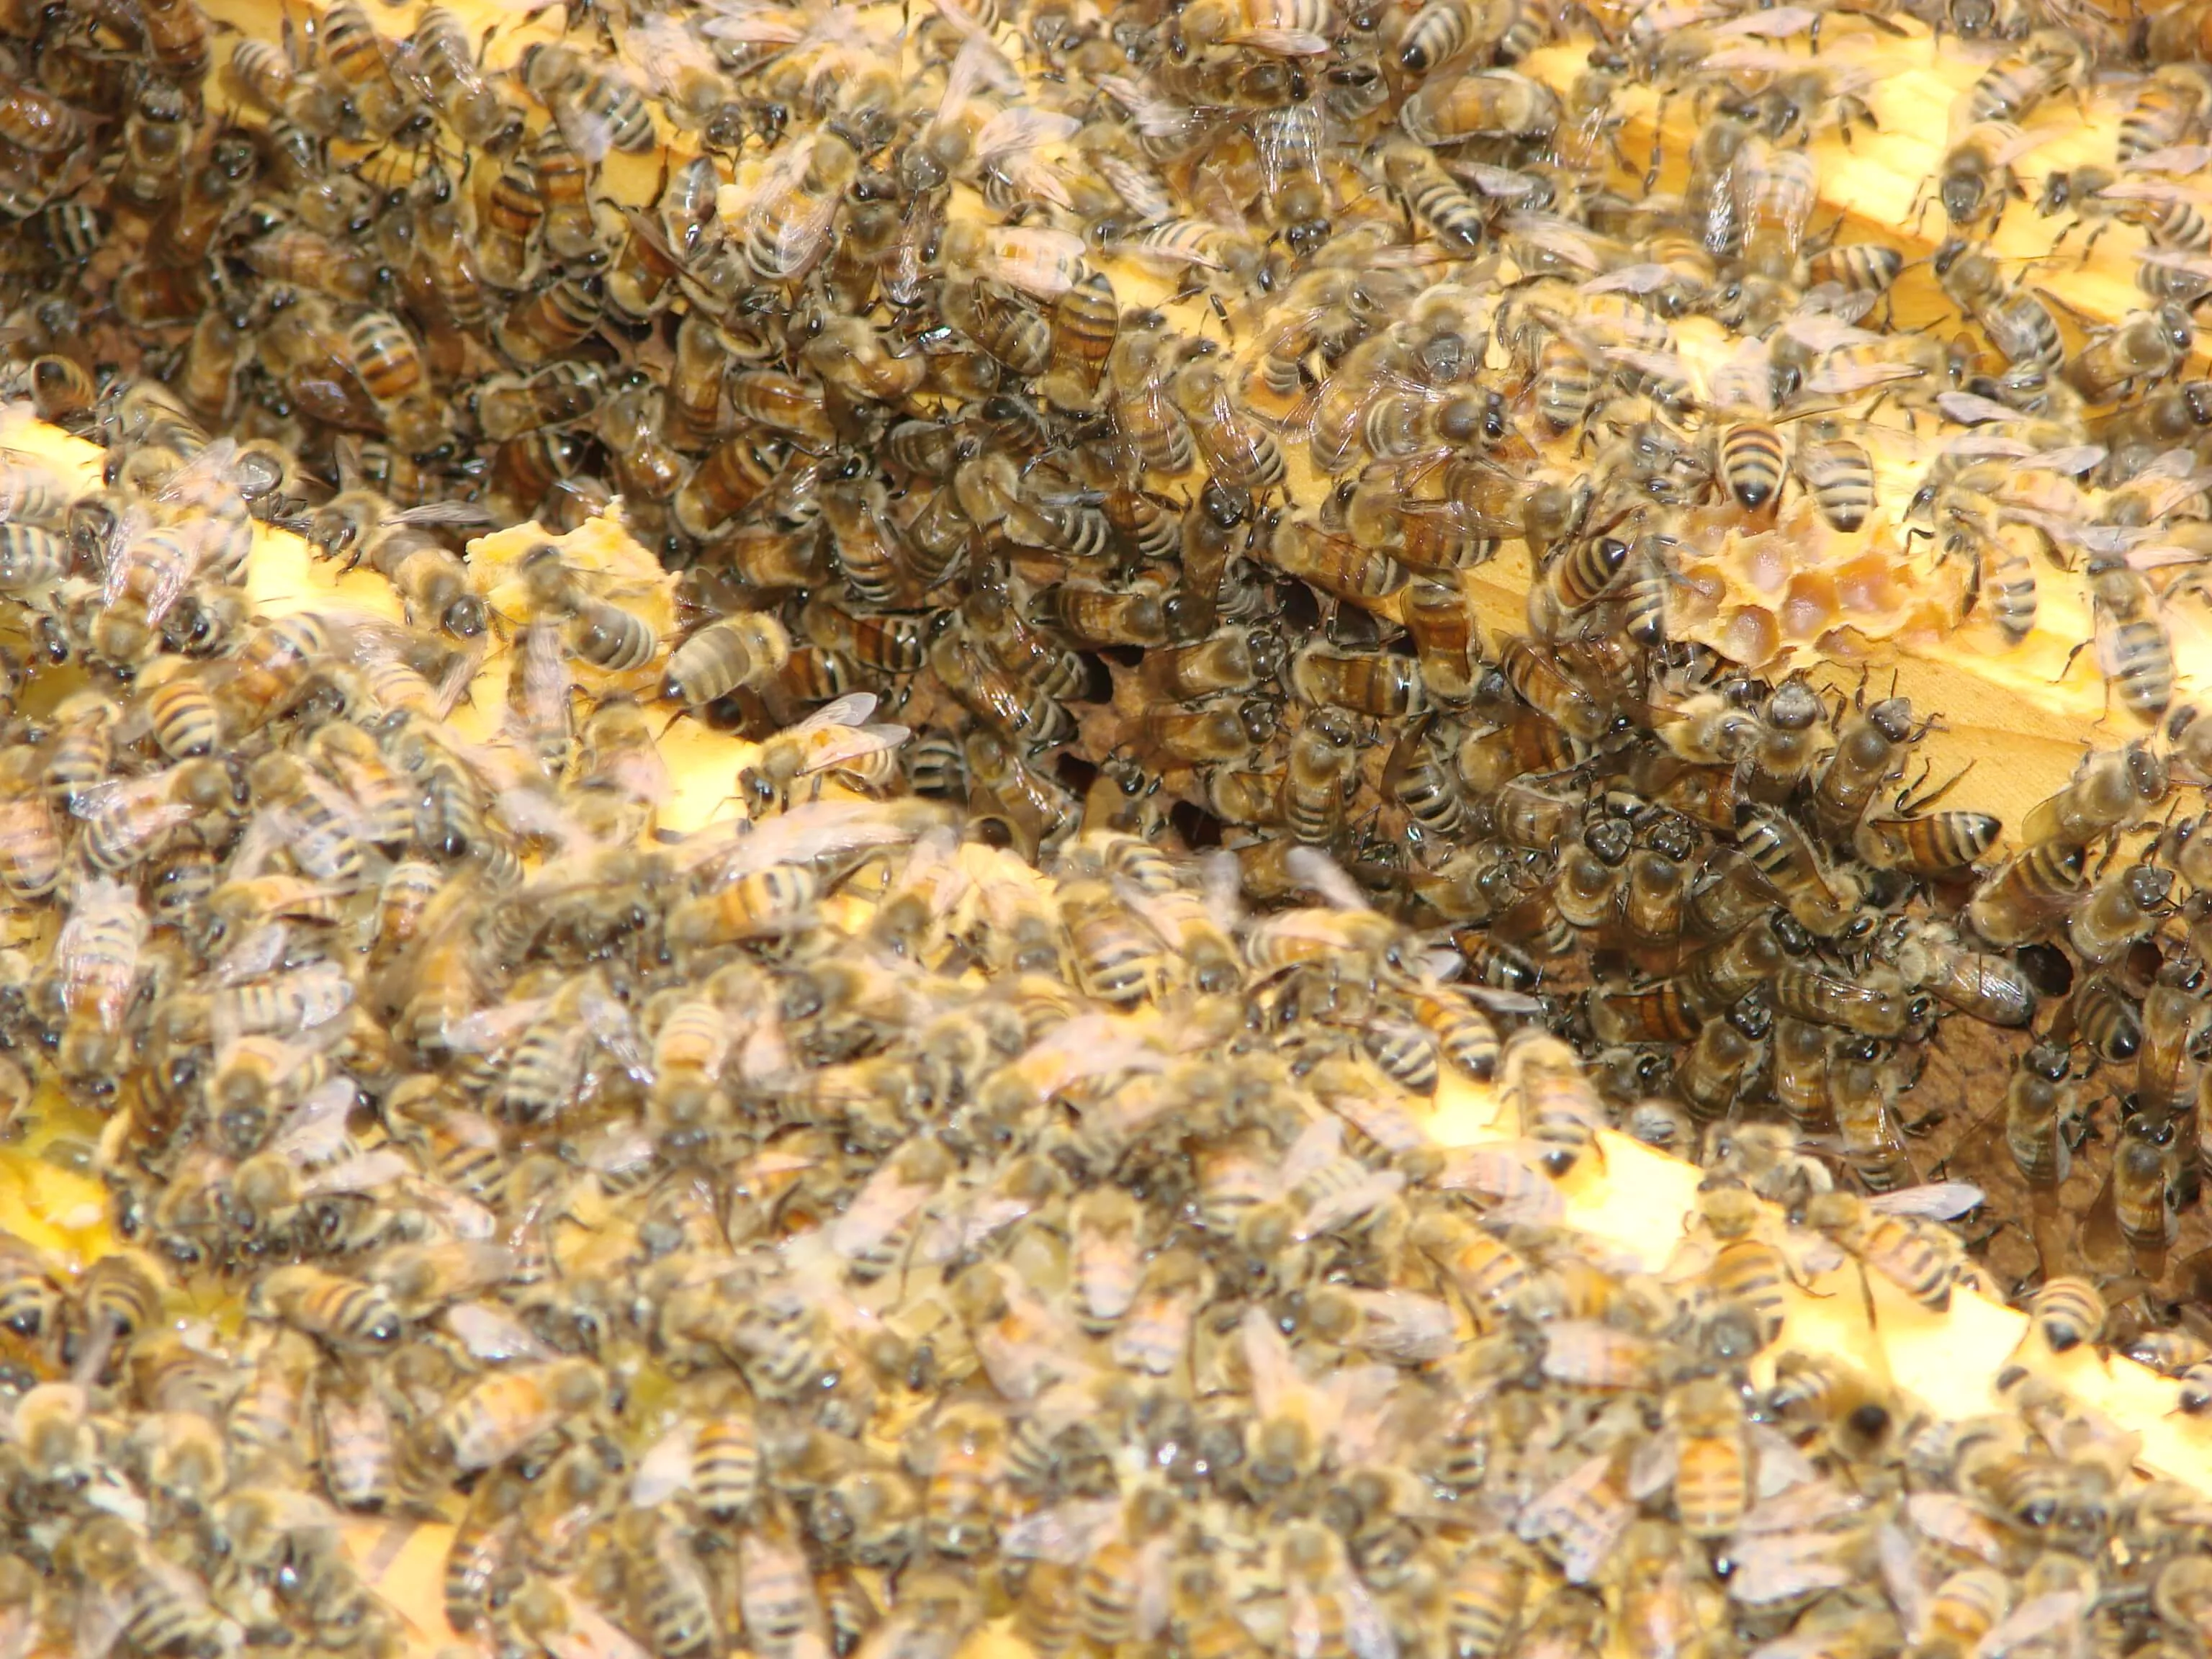 Bees in a beehive